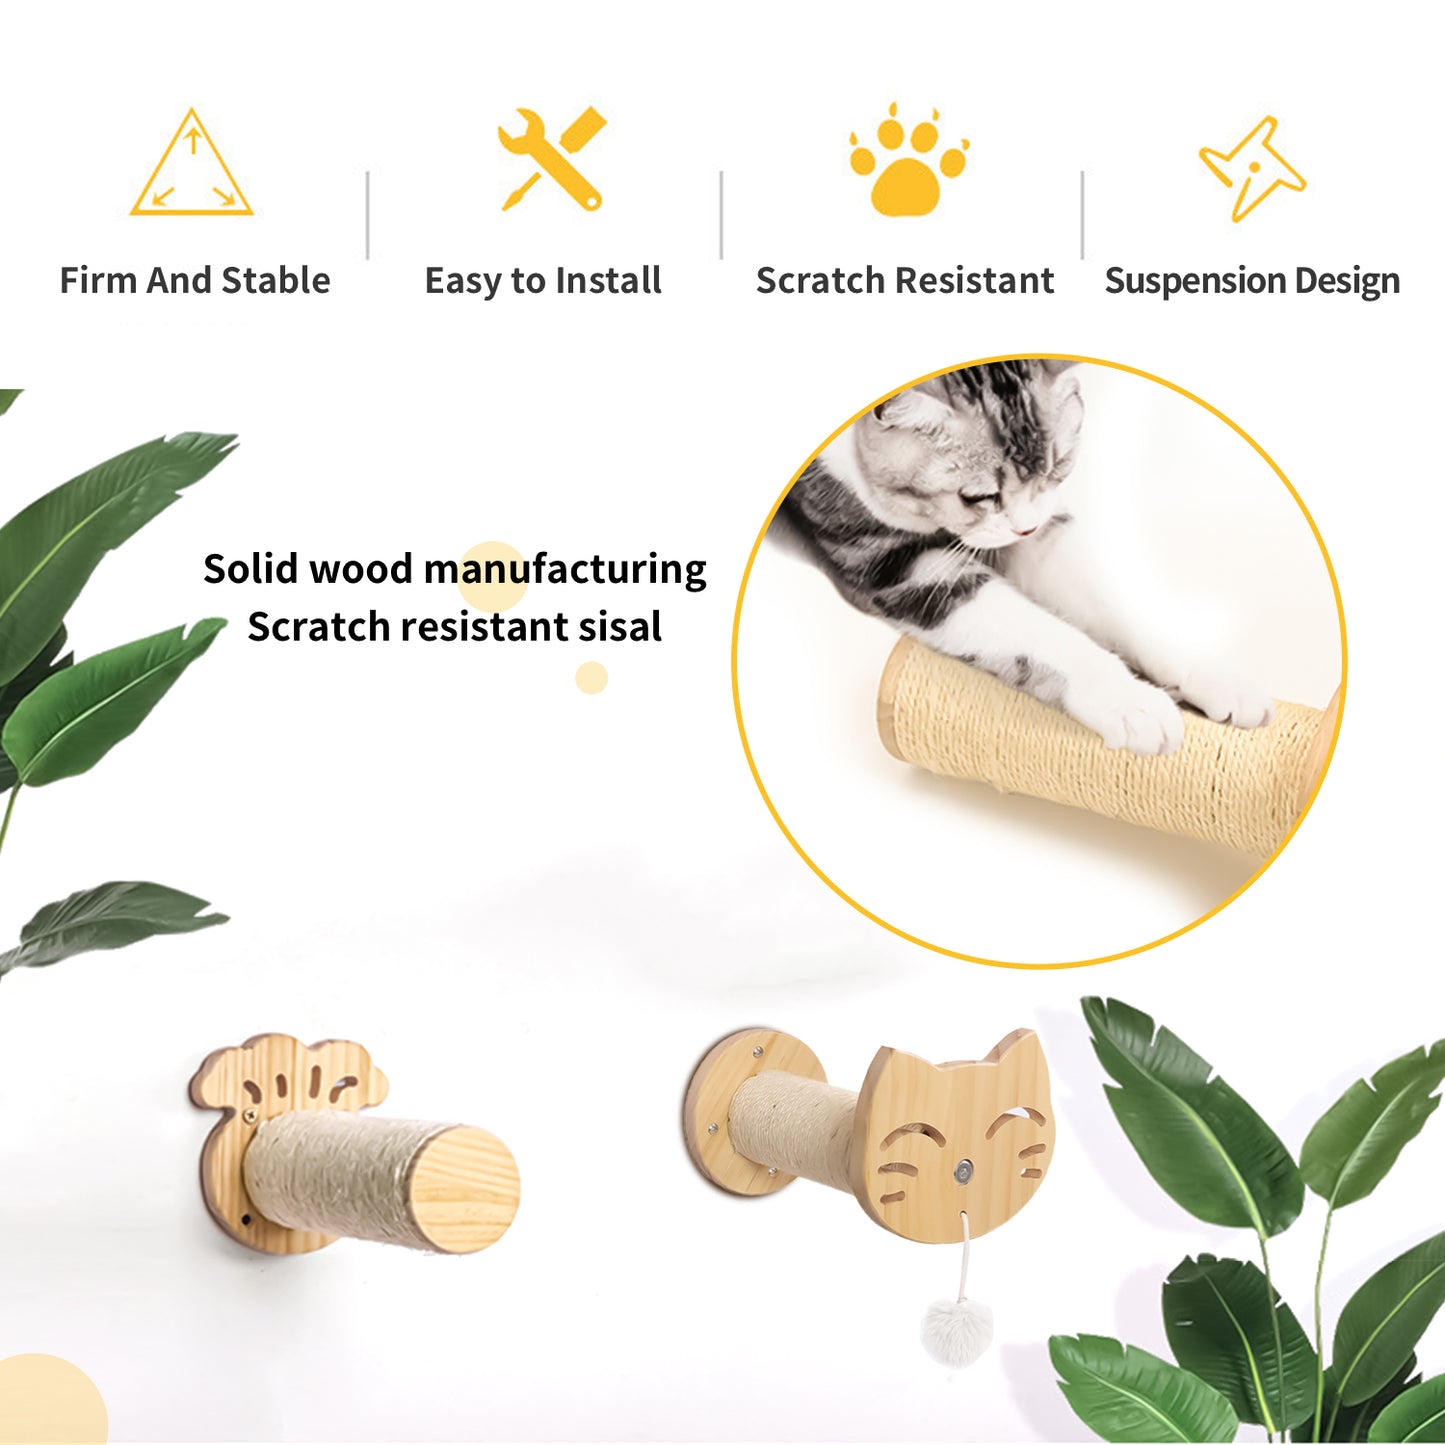 Cat Wall Bed Hammock Cat Scratching Post Mounted, Mount Cat Tree Lounge Set, Cat Hammock Scratching Post Cat Furniture, Used for Sleeping, Playing, Climbing, Easily Accommodates 35 Pounds